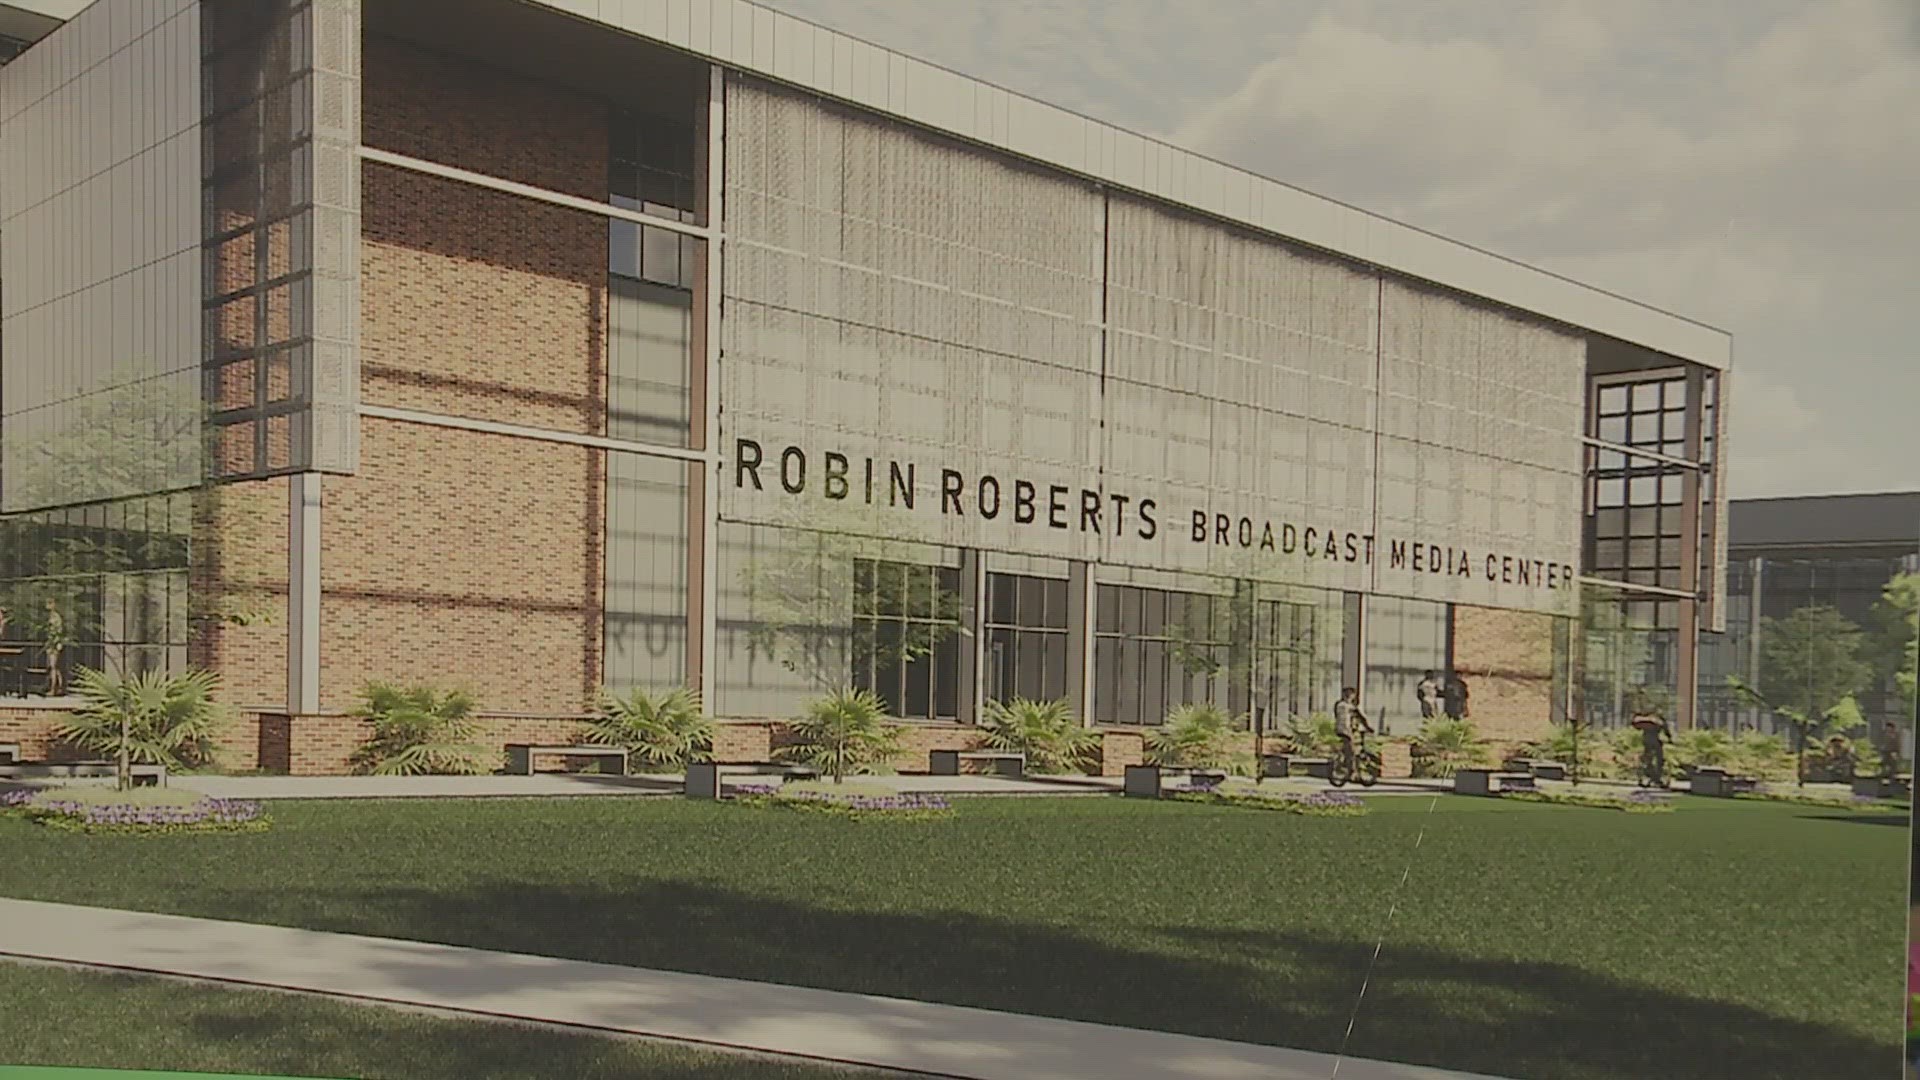 Roberts is excited for what the media center will bring to students.